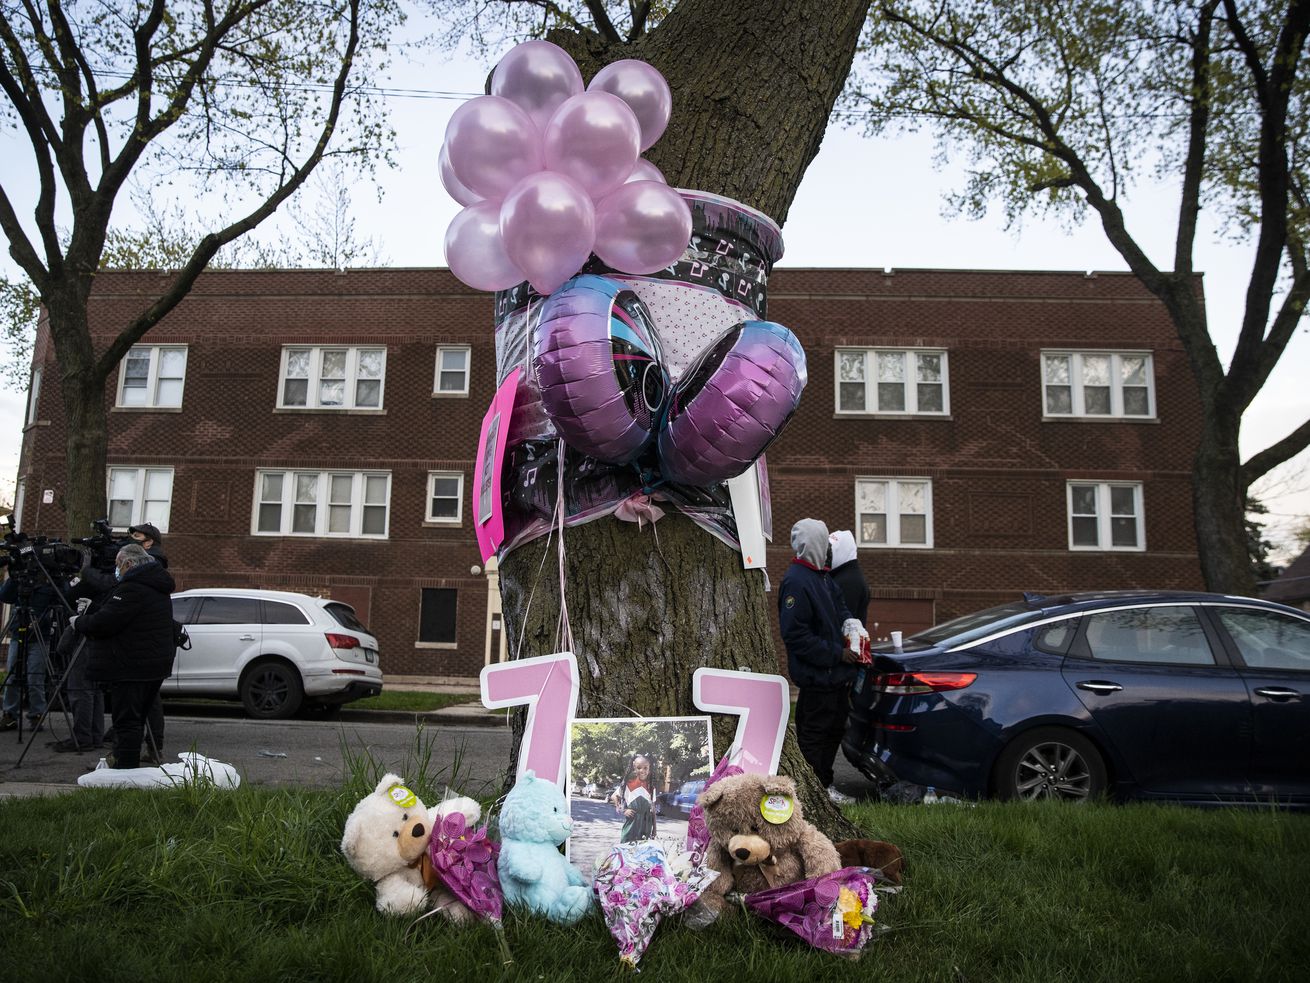 Dozens of family members and supporters of 7-year-old Jaslyn Adams gather for a vigil outside the girl’s grandmother’s West Side home, Wednesday evening, April 21, 2021. Jaslyn was fatally shot Sunday, April 18, while in line at a McDonald’s drive-thru with her father, who suffered one gunshot wound to the back and survived.